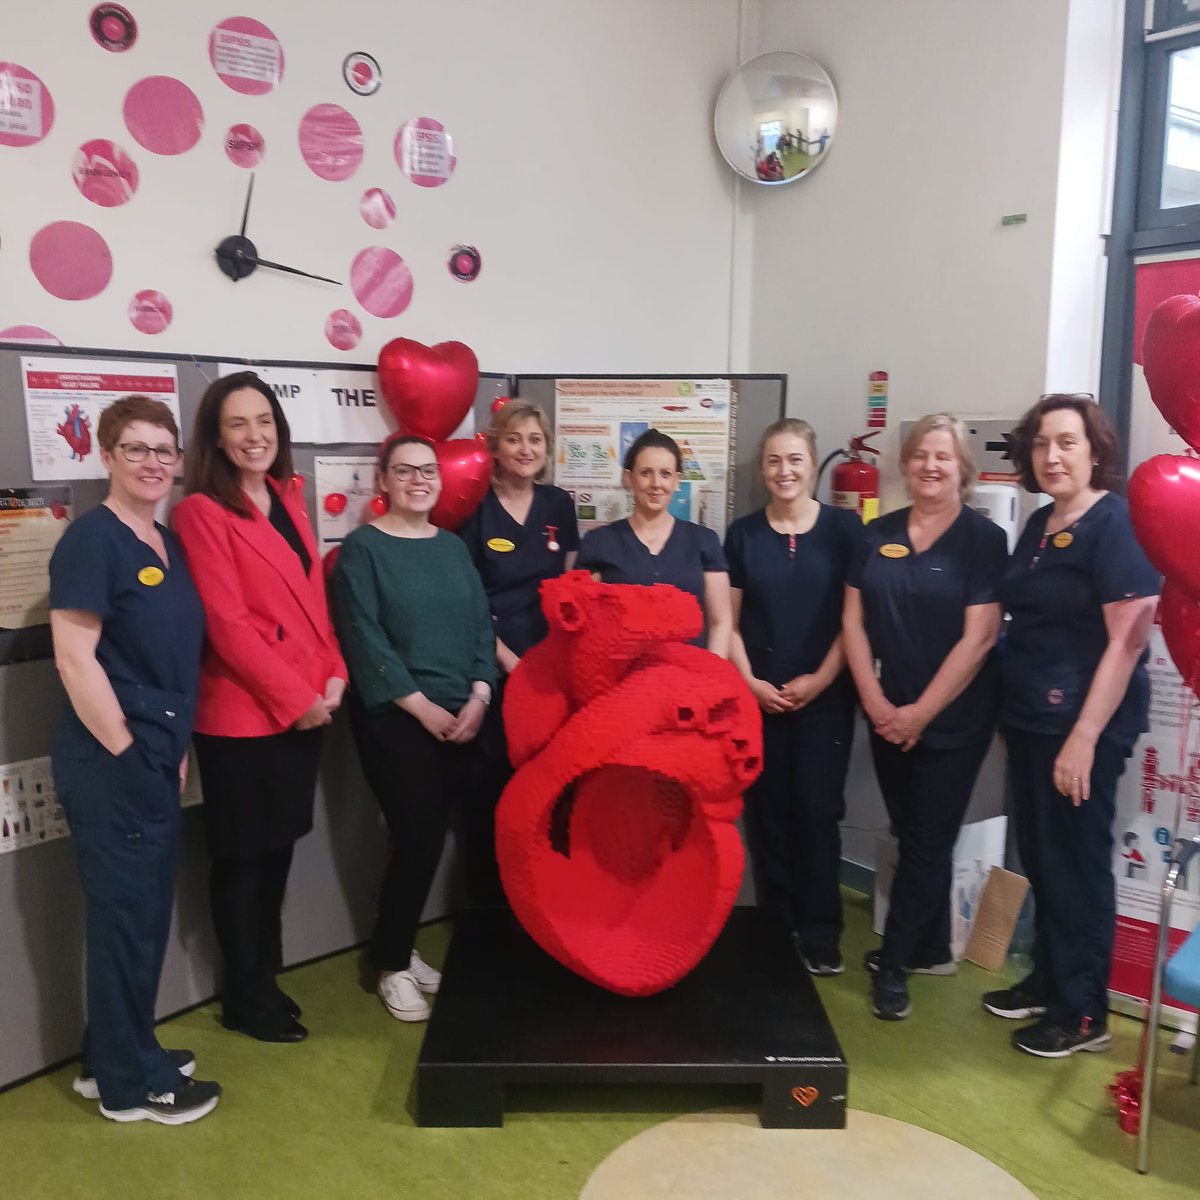 It's #HeartFailureAwareness Week. Our Heart Failure team actively engaged staff and visitors yesterday to promote awareness of the #BumpUpThePump campaign, emphasising heart failure risk factors and symptoms.